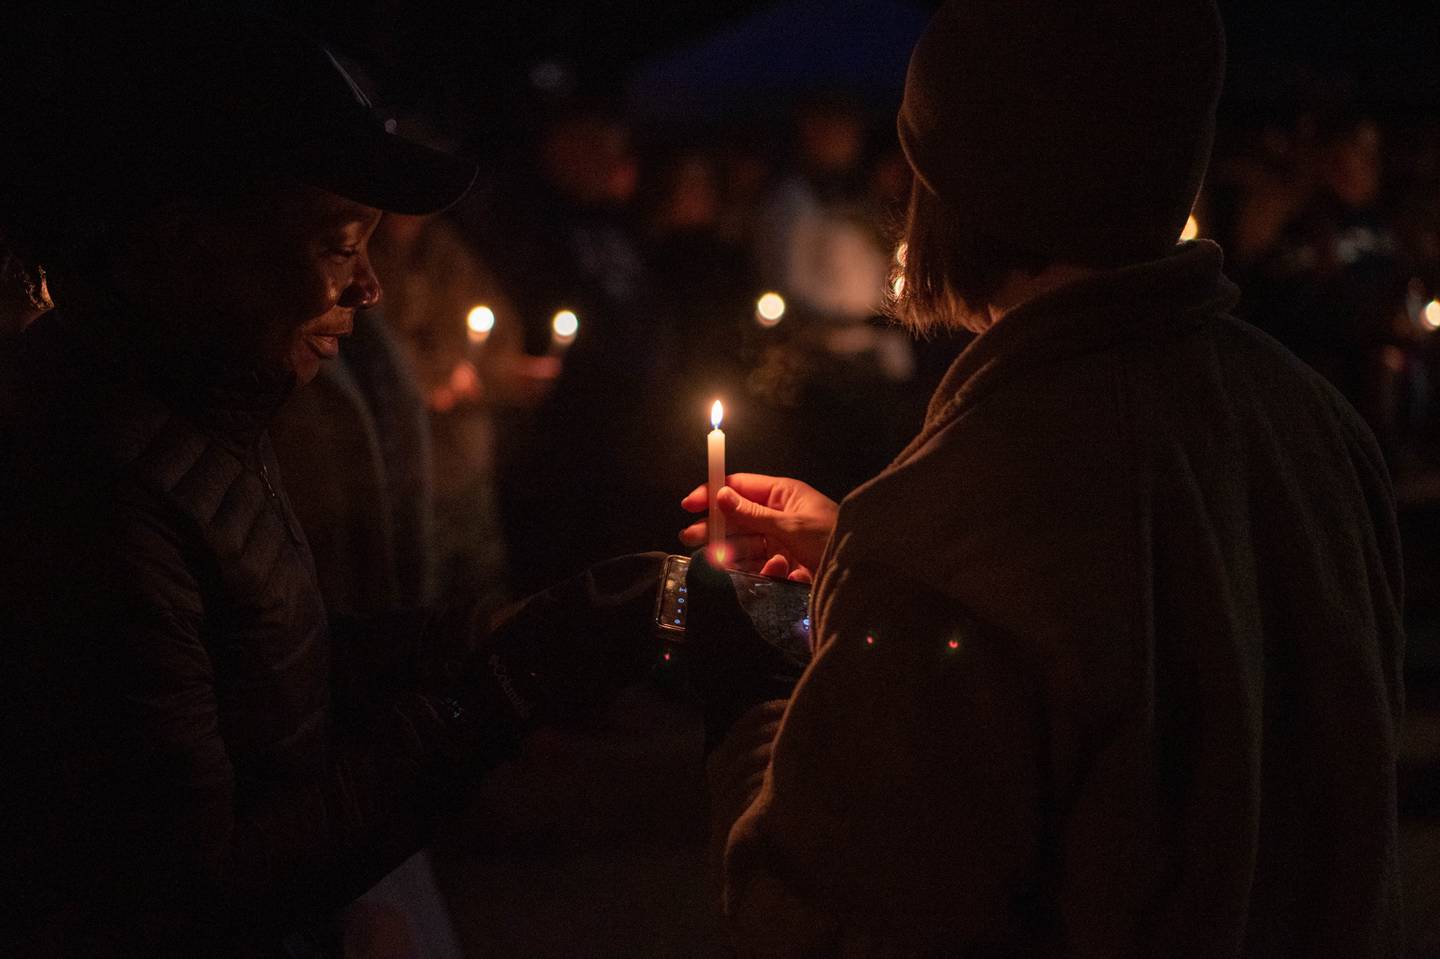 Service members hold candles in honor of those impacted by suicide, domestic violence, sexual assault and harassment at Spangdahlem Air Base, Germany, Sept. 30, 2022.